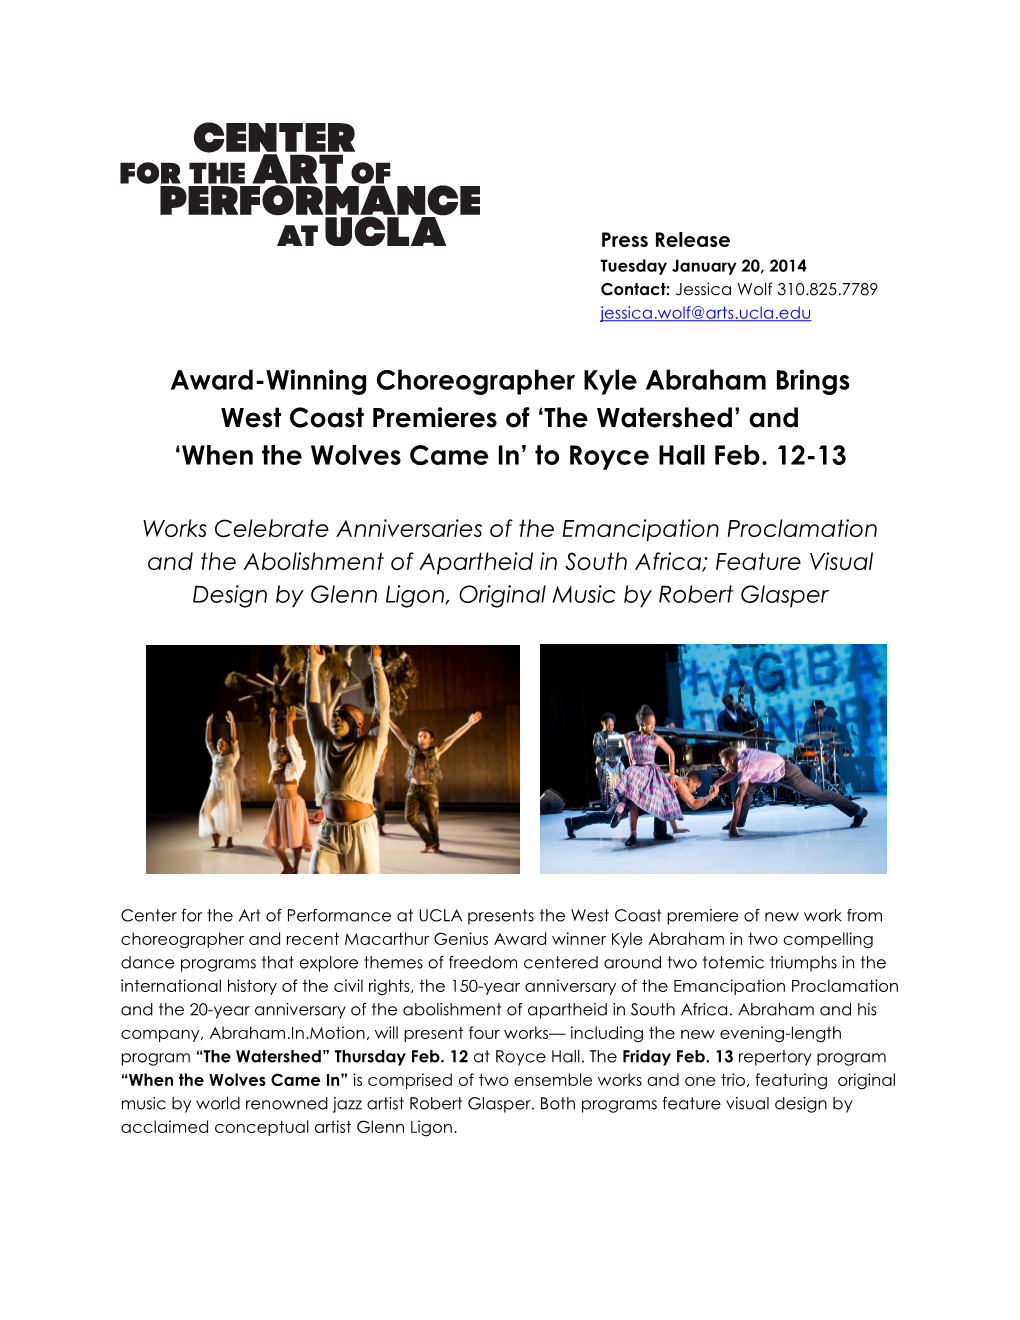 Award-Winning Choreographer Kyle Abraham Brings West Coast Premieres of ‘The Watershed’ and ‘When the Wolves Came In’ to Royce Hall Feb